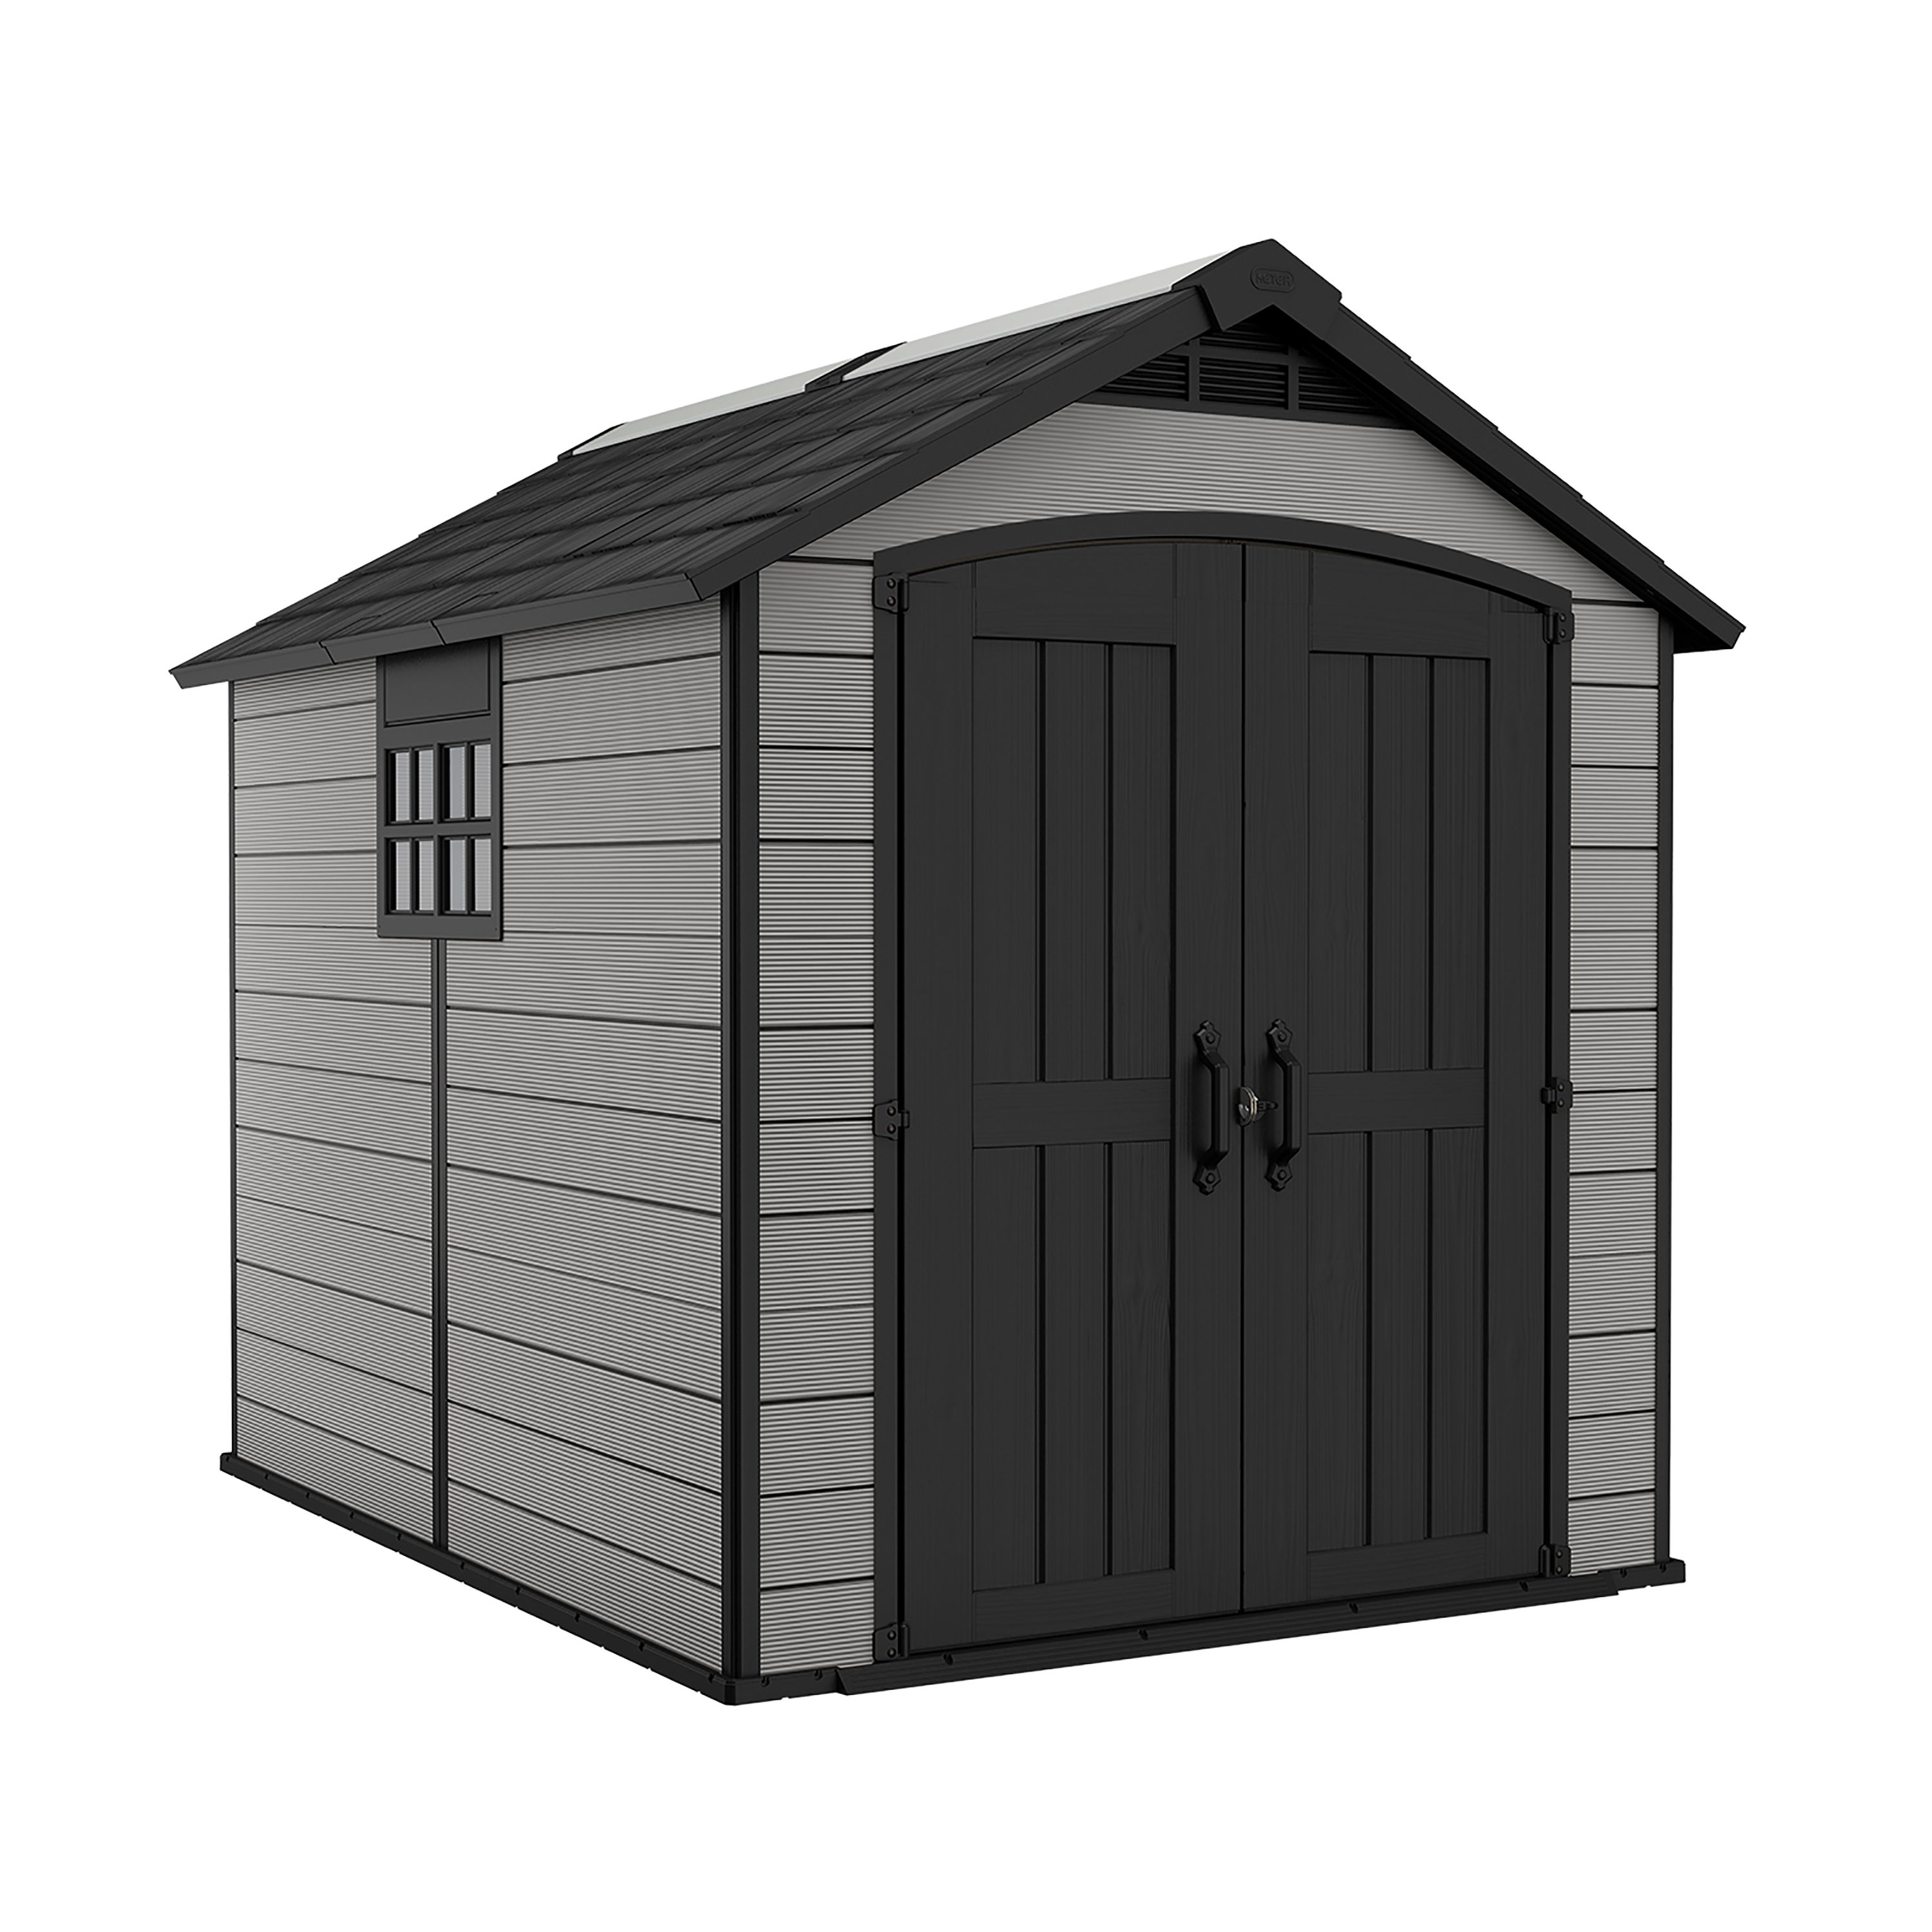 Keter Premier Grey Plastic Shed With Floor (Base Included)